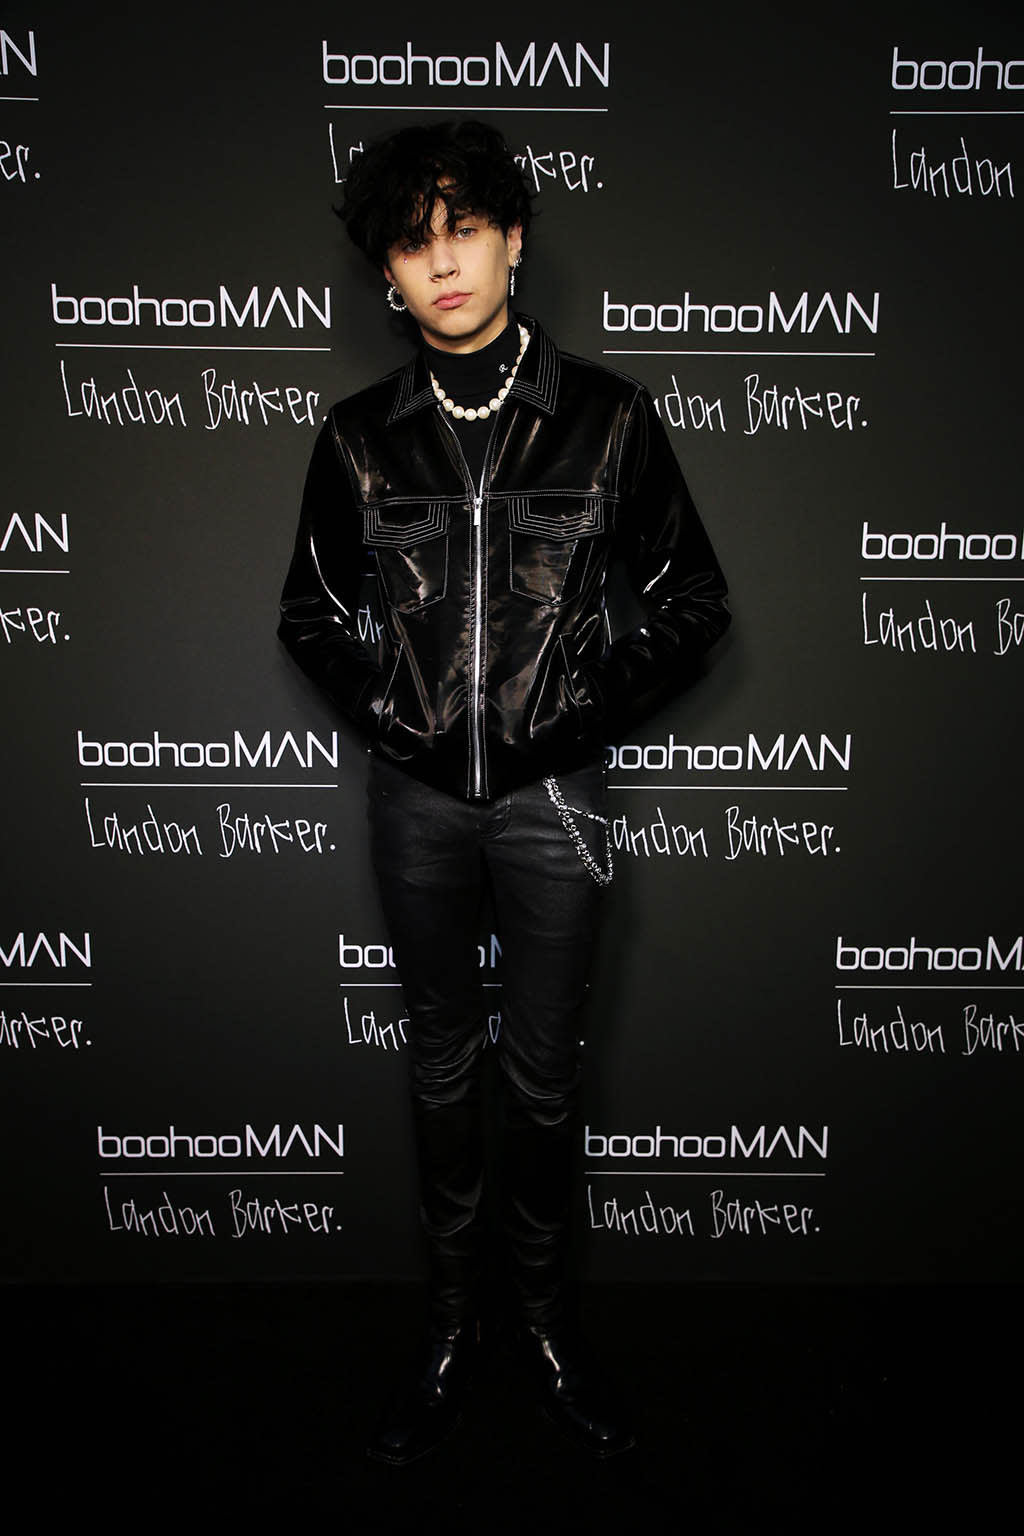 Landon Barker attends the boohooMAN x Landon Barker launch party at Desert 5 Spot on June 14, 2022 in Los Angeles. - Credit: Courtesy of boohooMAN